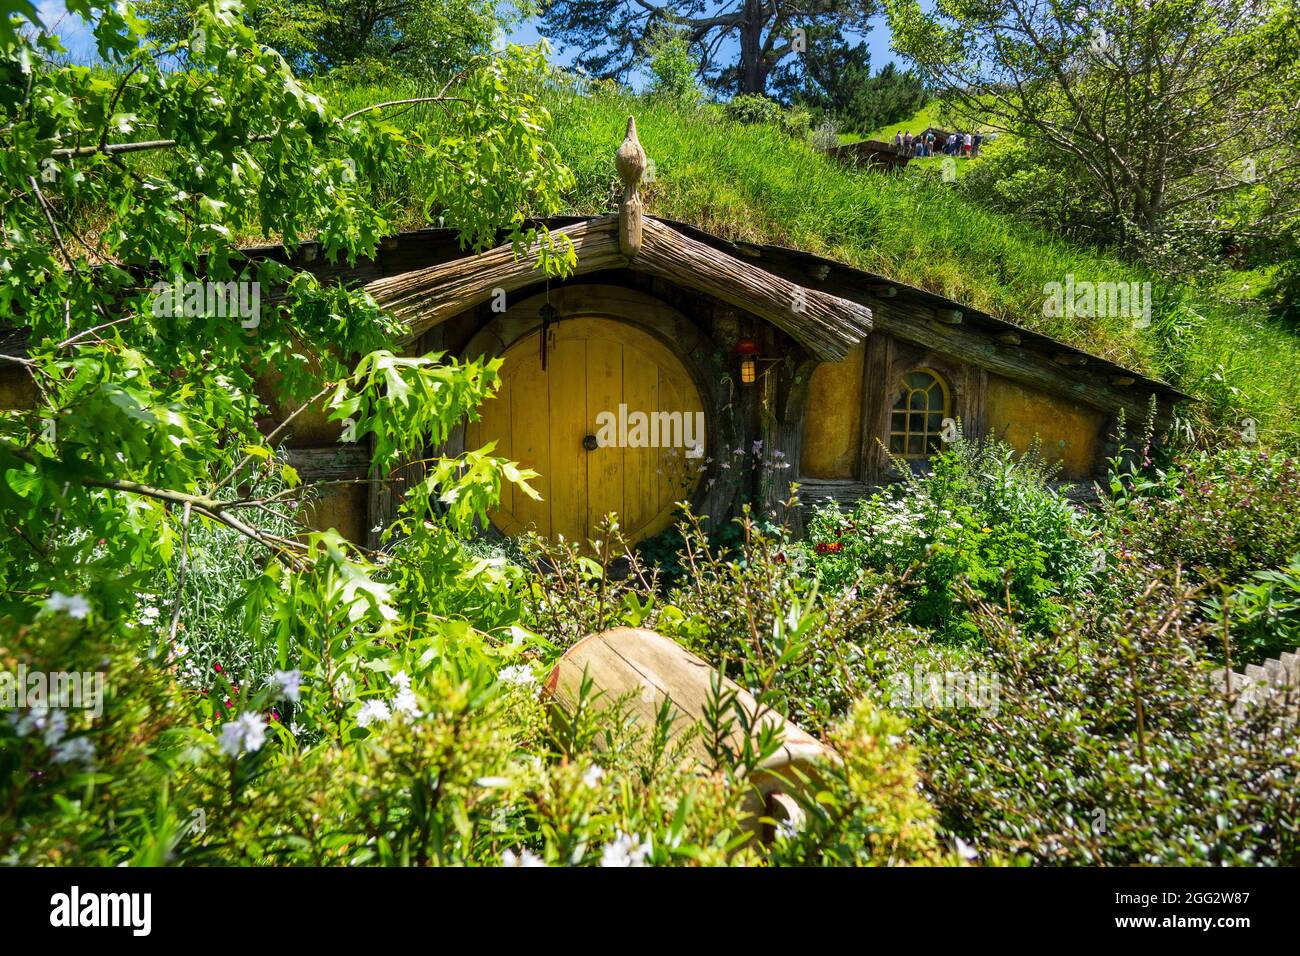 Samweis Gamgee's Hobbit Hole Home on the Hobbiton Movie Set for the Lord of the Rings Movie Trilogy in Matamata Nuova Zelanda Foto Stock